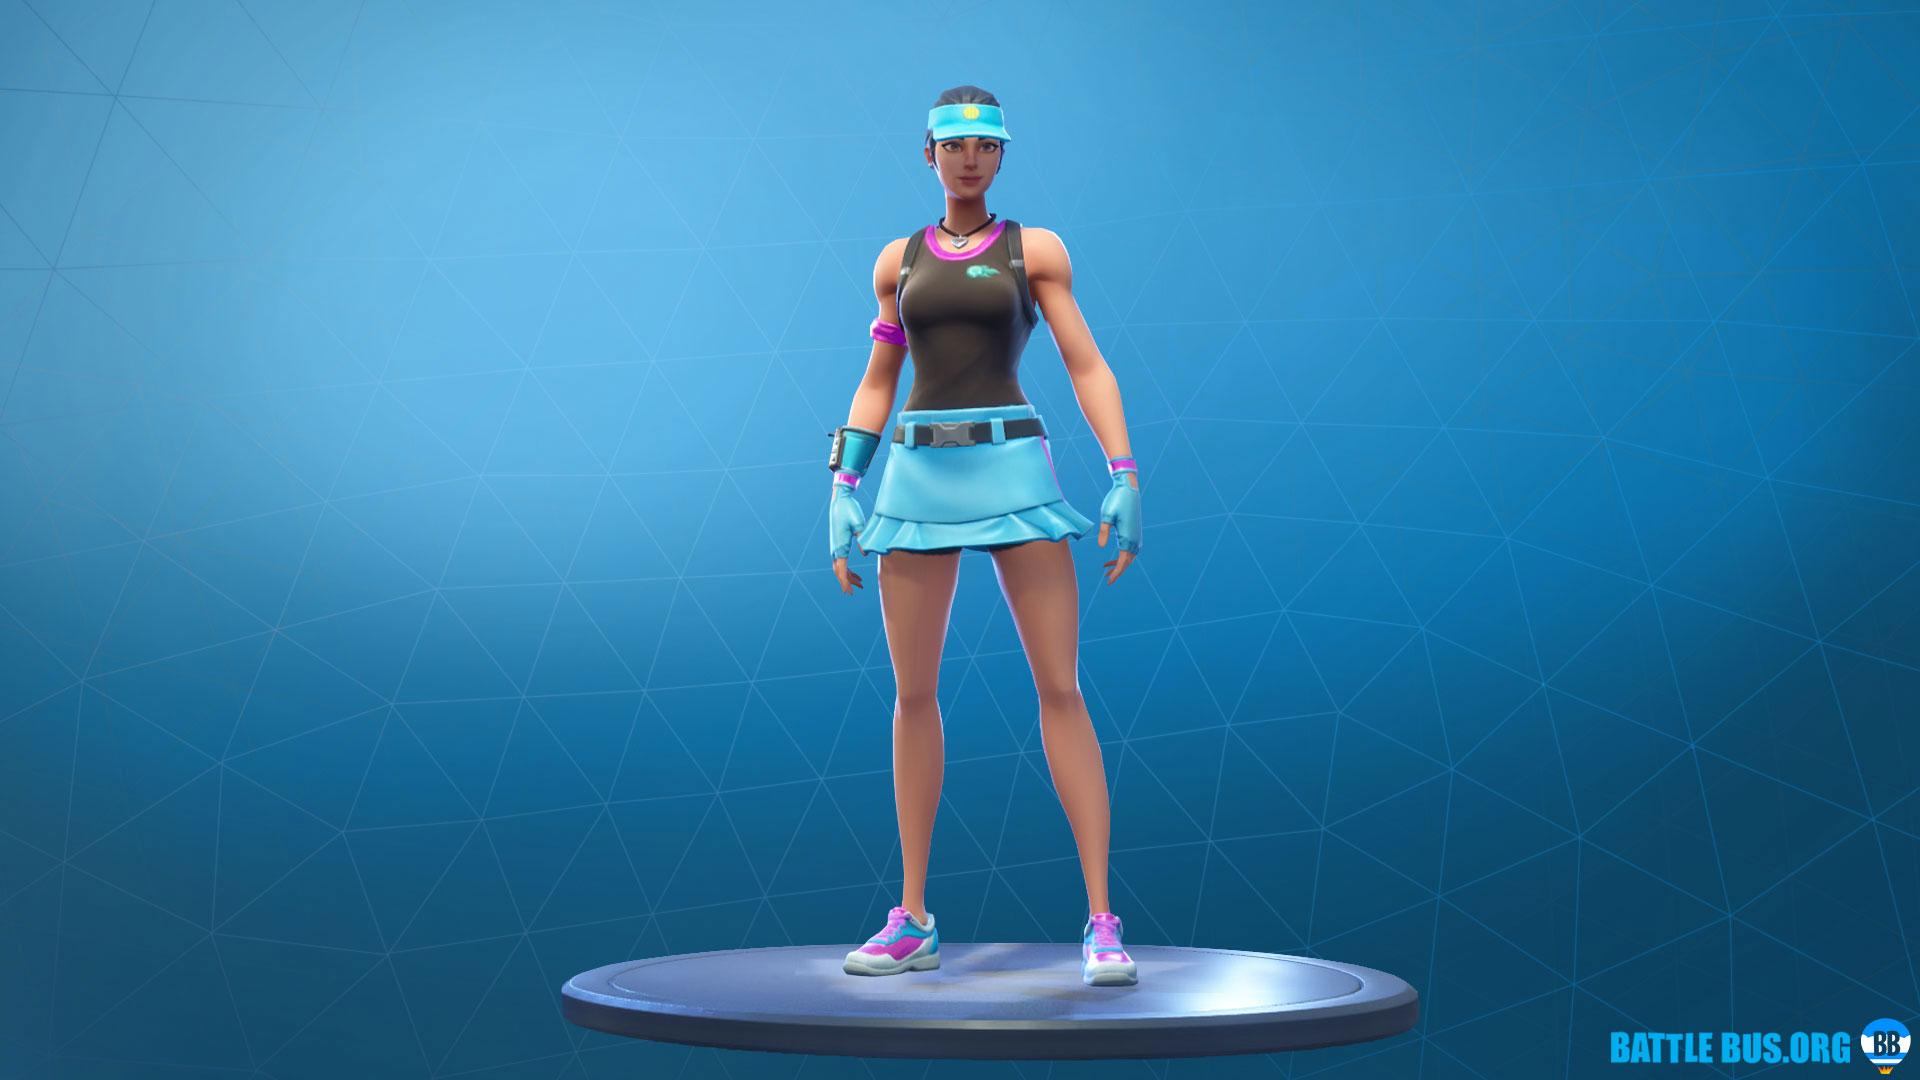 Volley Girl outfit girl Set, Fortnite skins, info